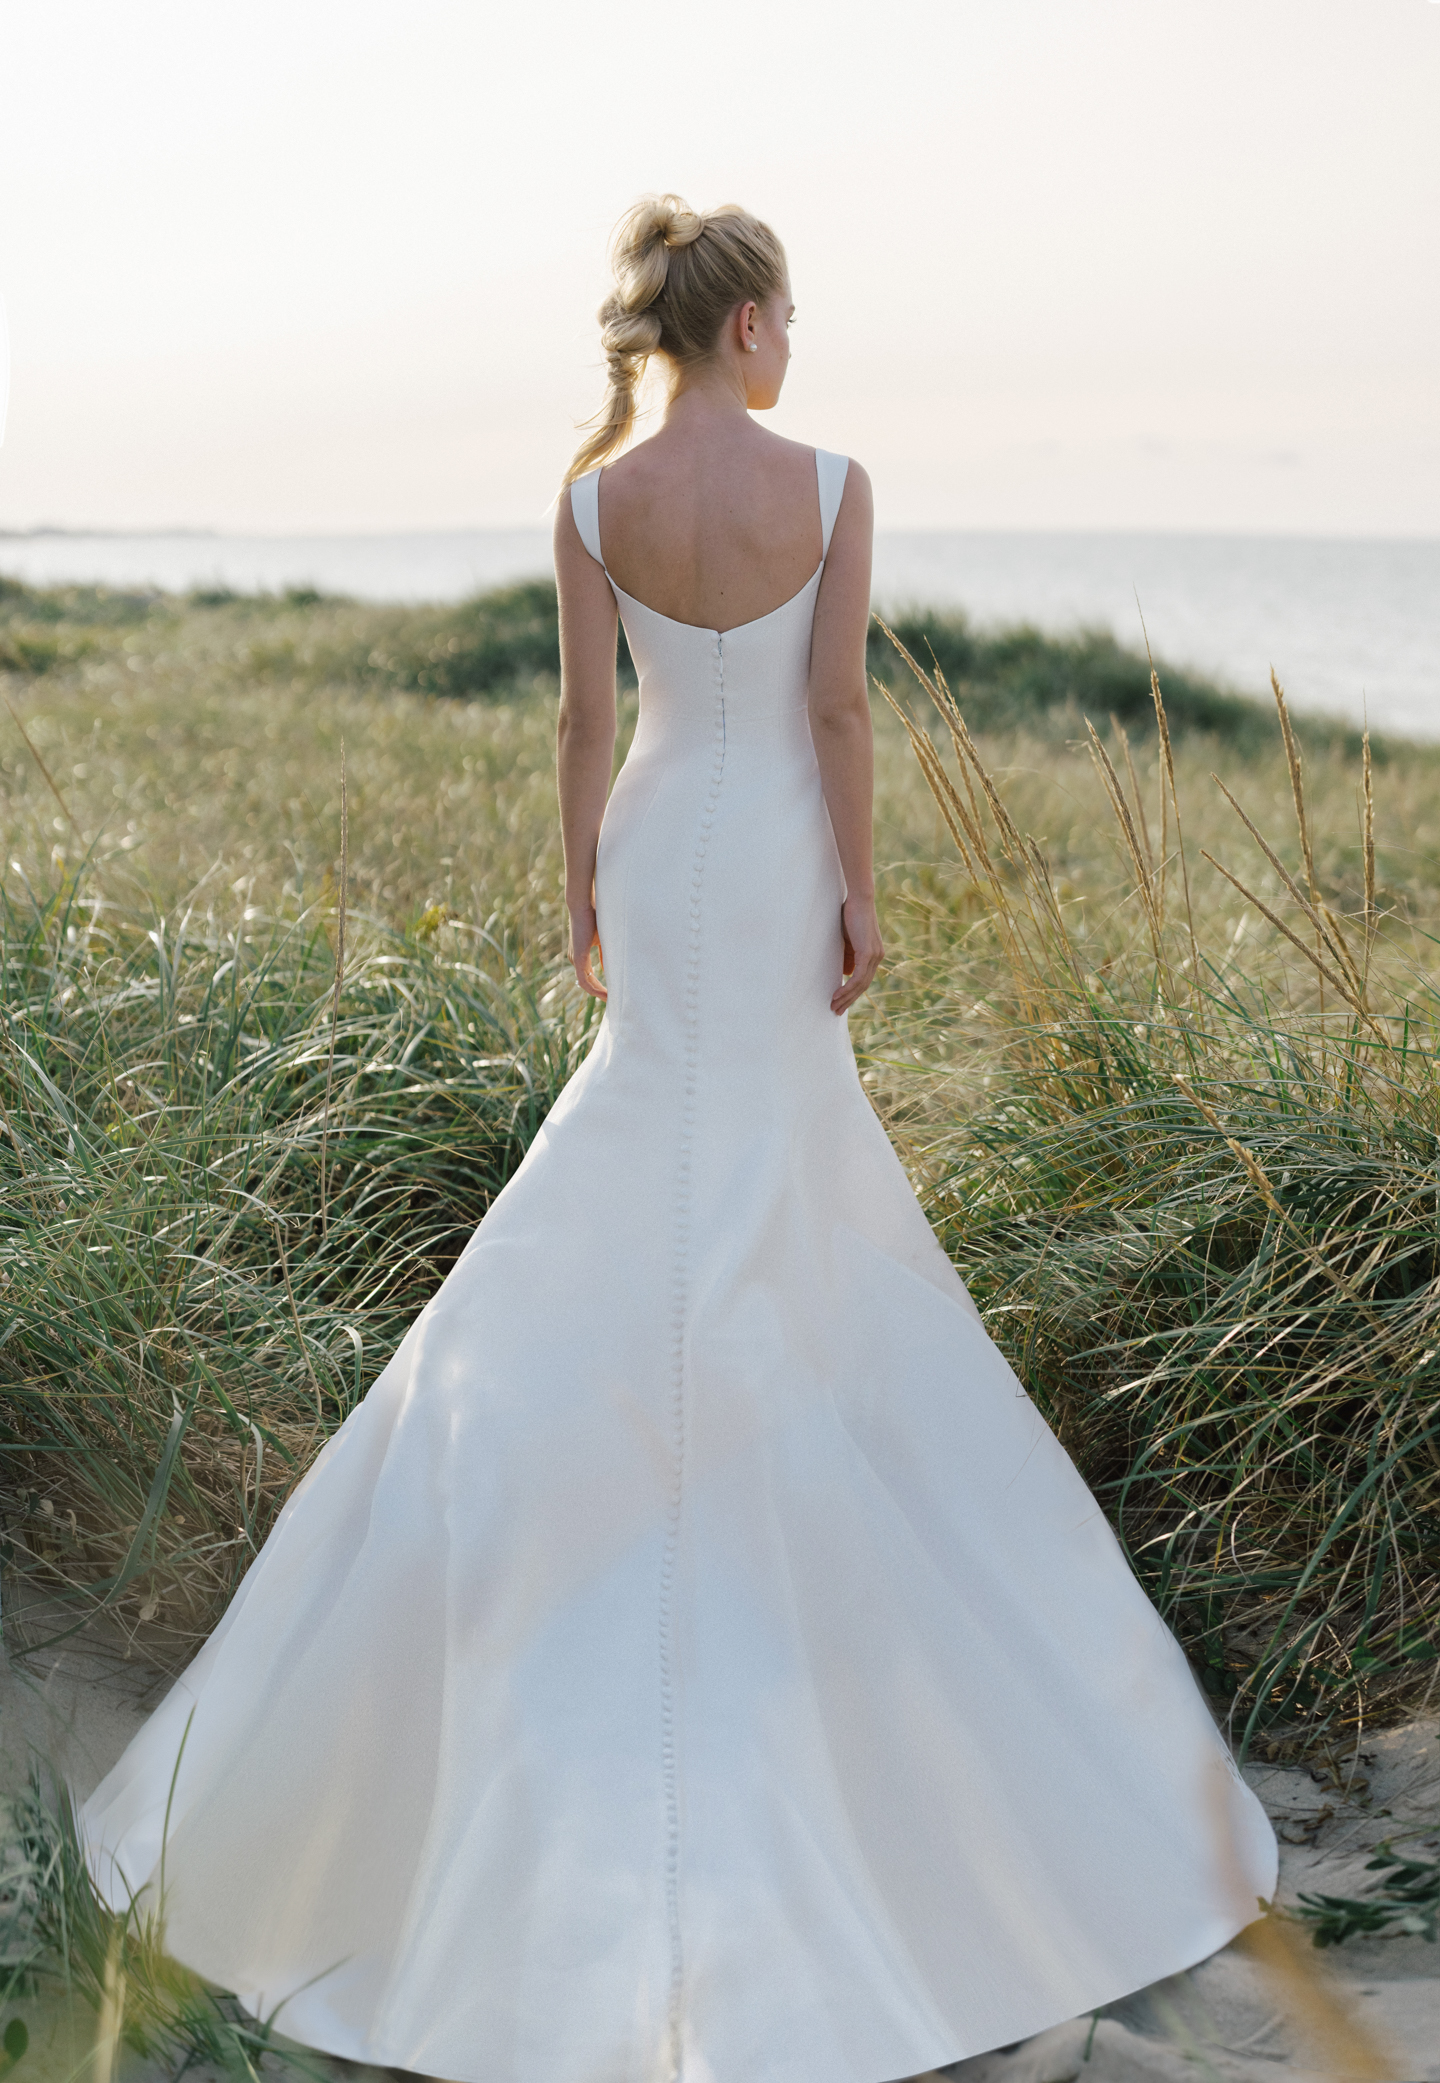 Sophisticated Fit-and-Flare Wedding Dress With Detachable Overskirt by Anne Barge - Image 2